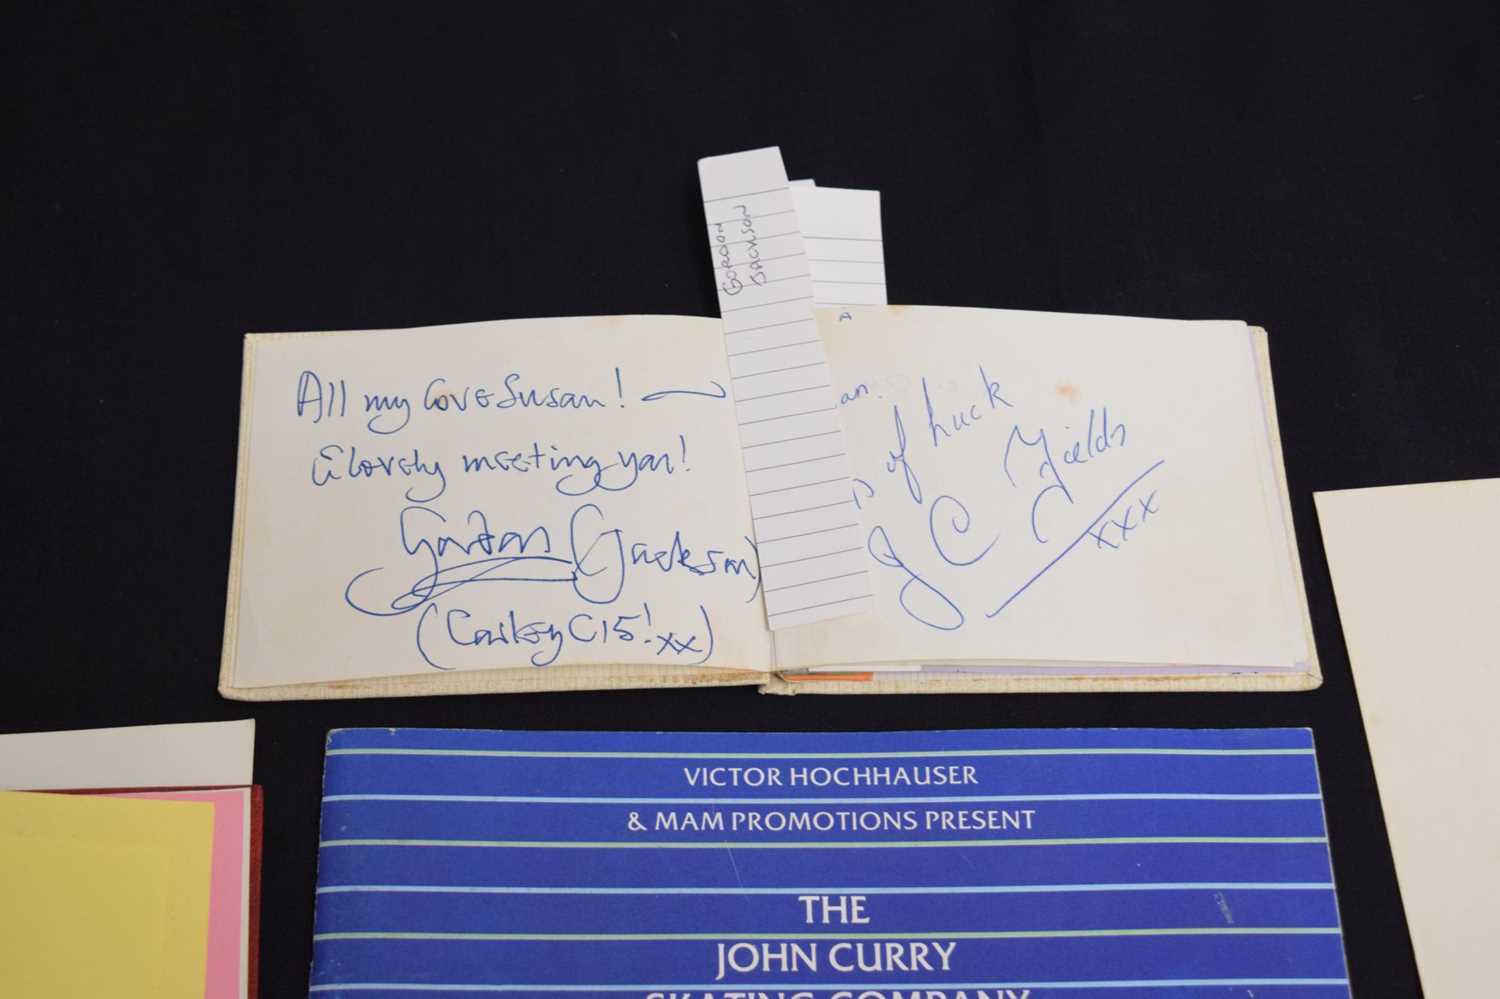 Autographs - Signed Pele and Geoff Hurst menu, and collection of circa 1980 autographs - Image 6 of 11